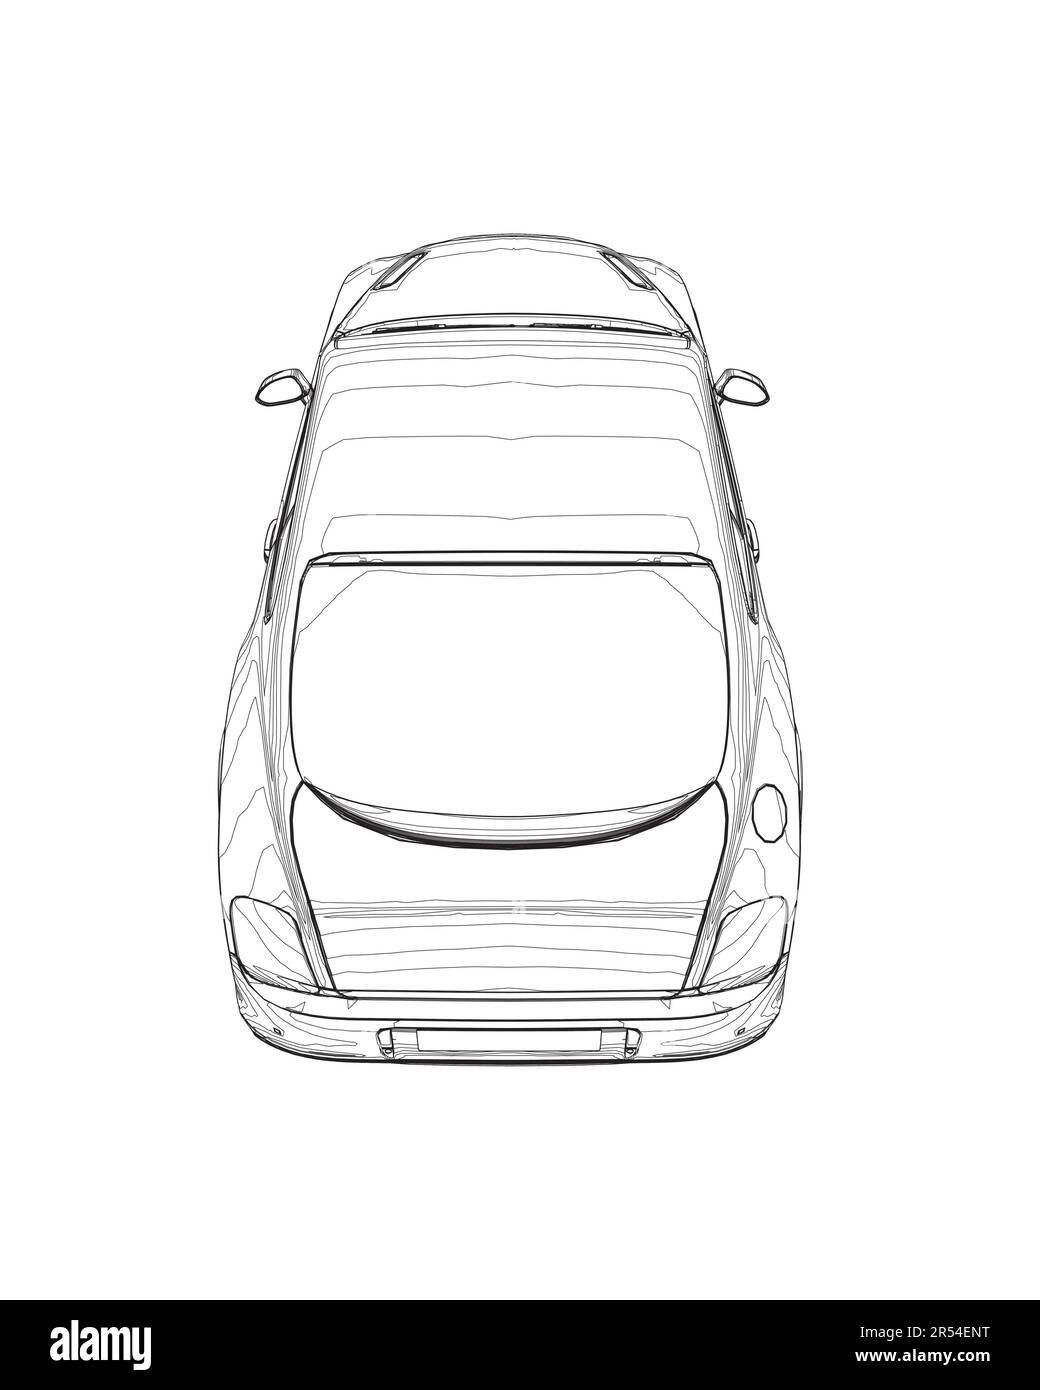 Sedan car in outline. Business sedan vehicle template vector isolated on white. Sport car outlined sketch, stylized vector symbol. High-end car. Vecto Stock Vector